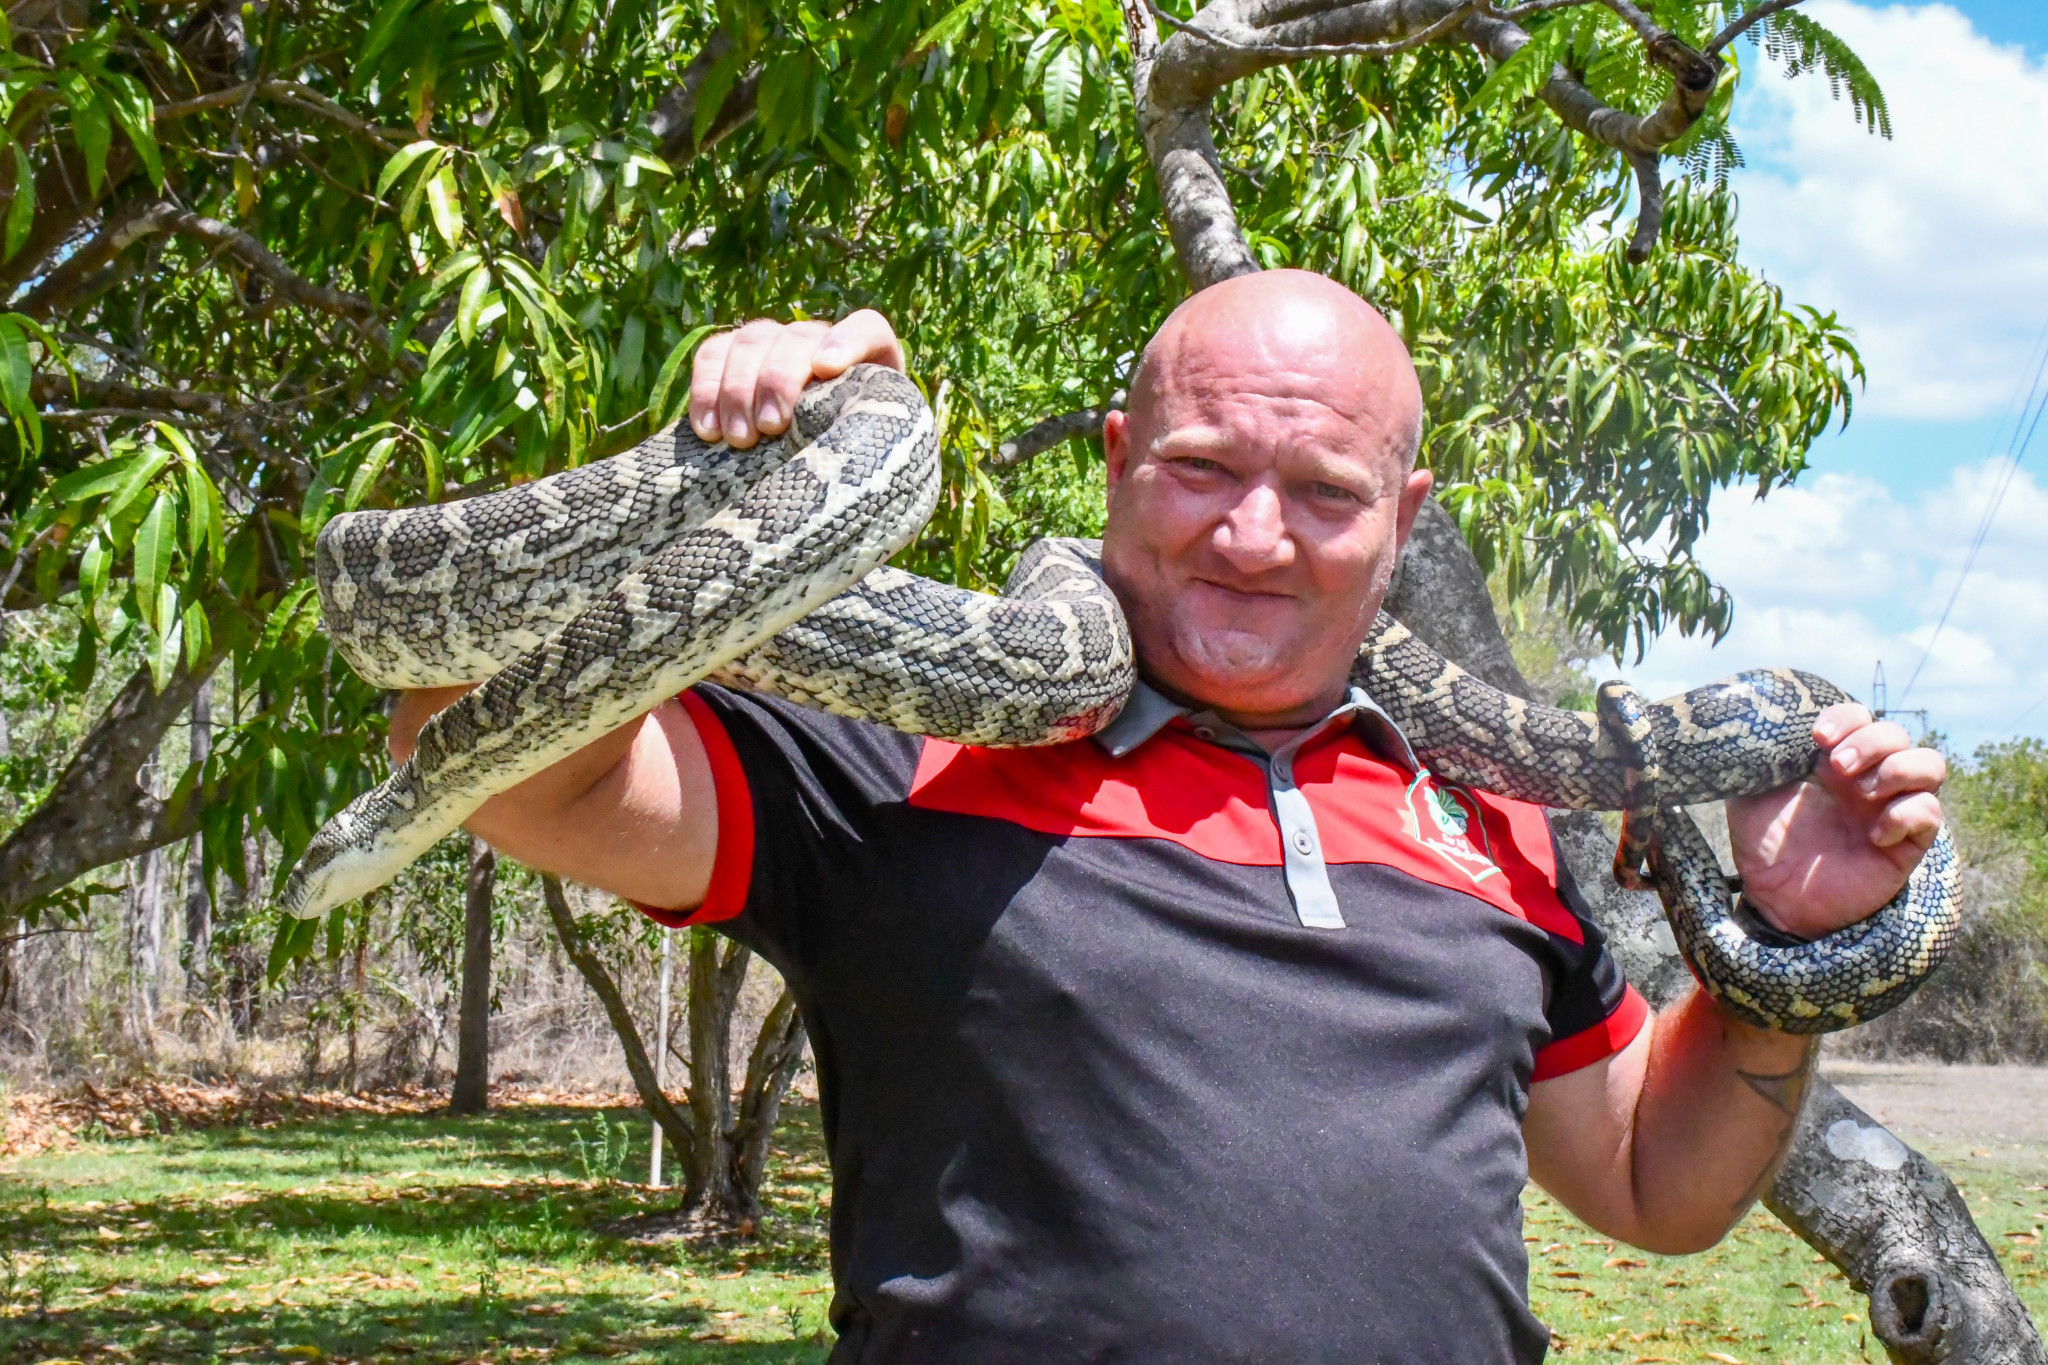 Close Encounter’s snake catcher Jay Everdeen is urging people to stay vigilant this snake season.